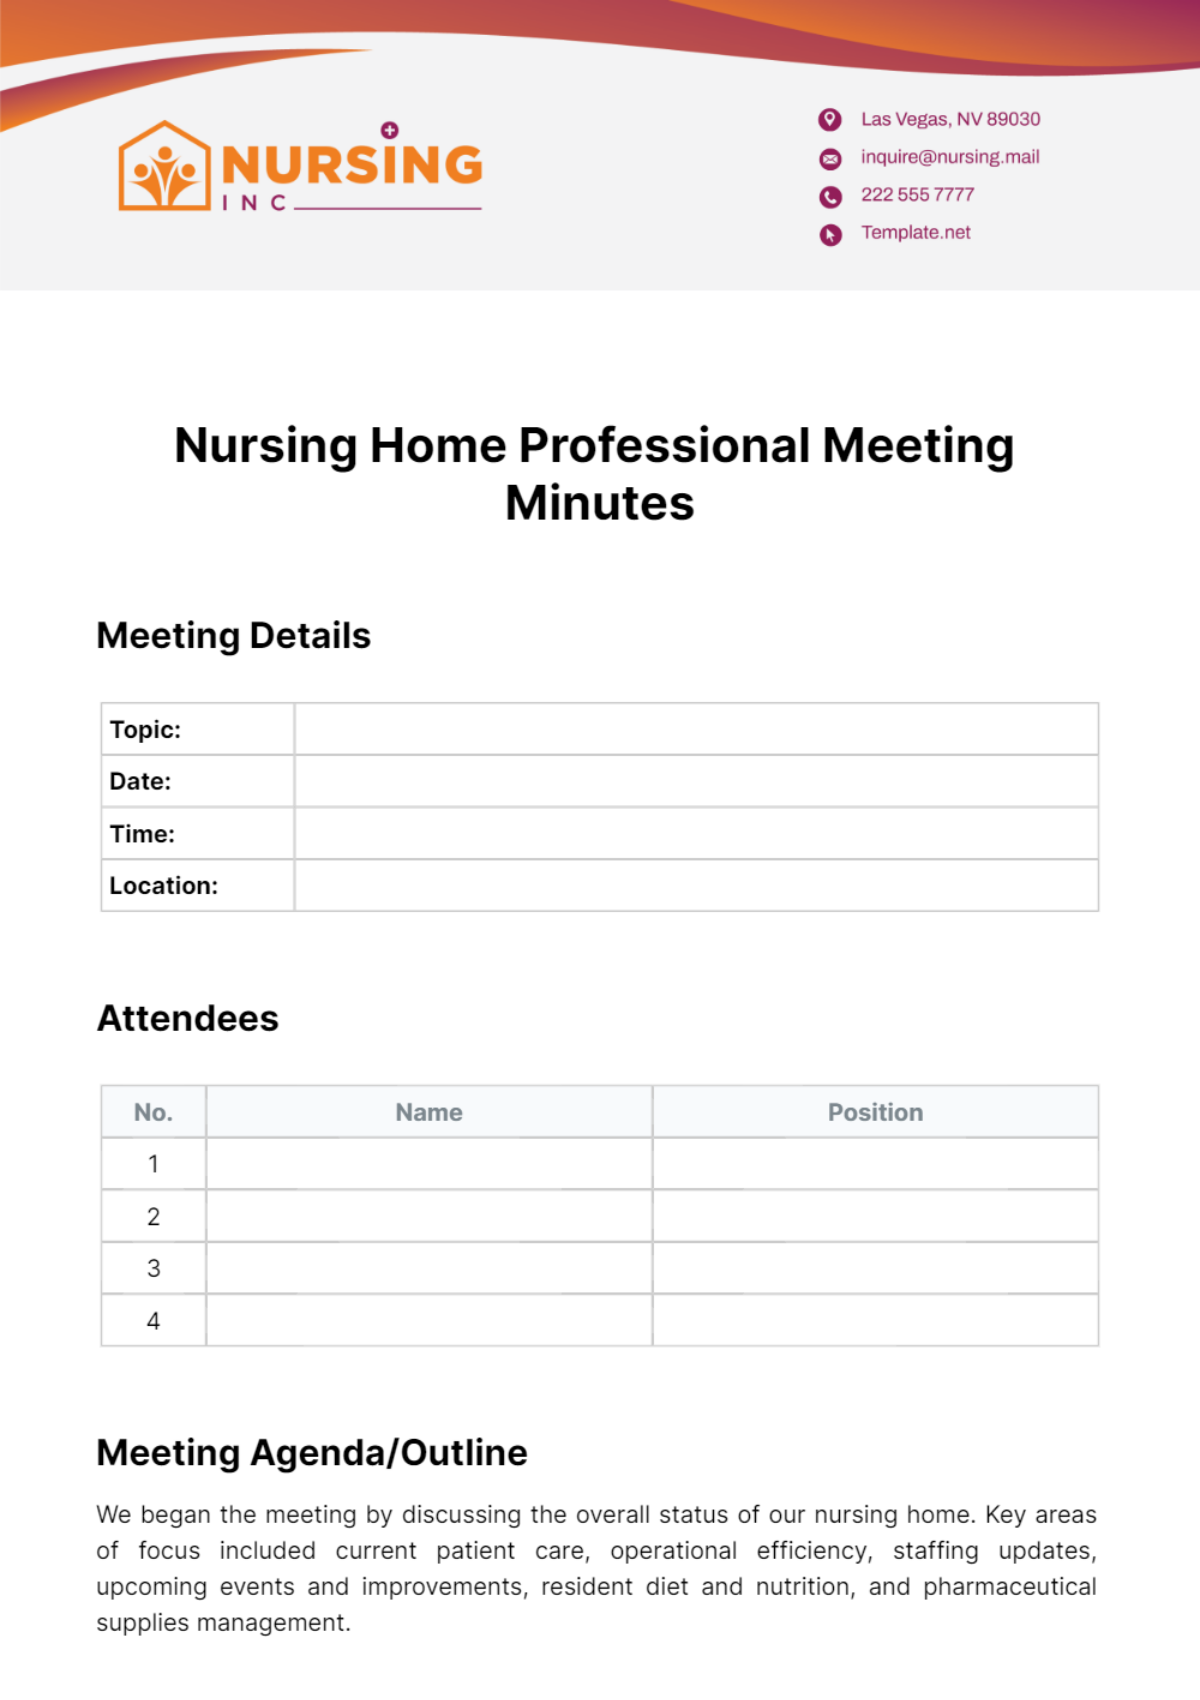 Nursing Home Professional Meeting Minutes Template